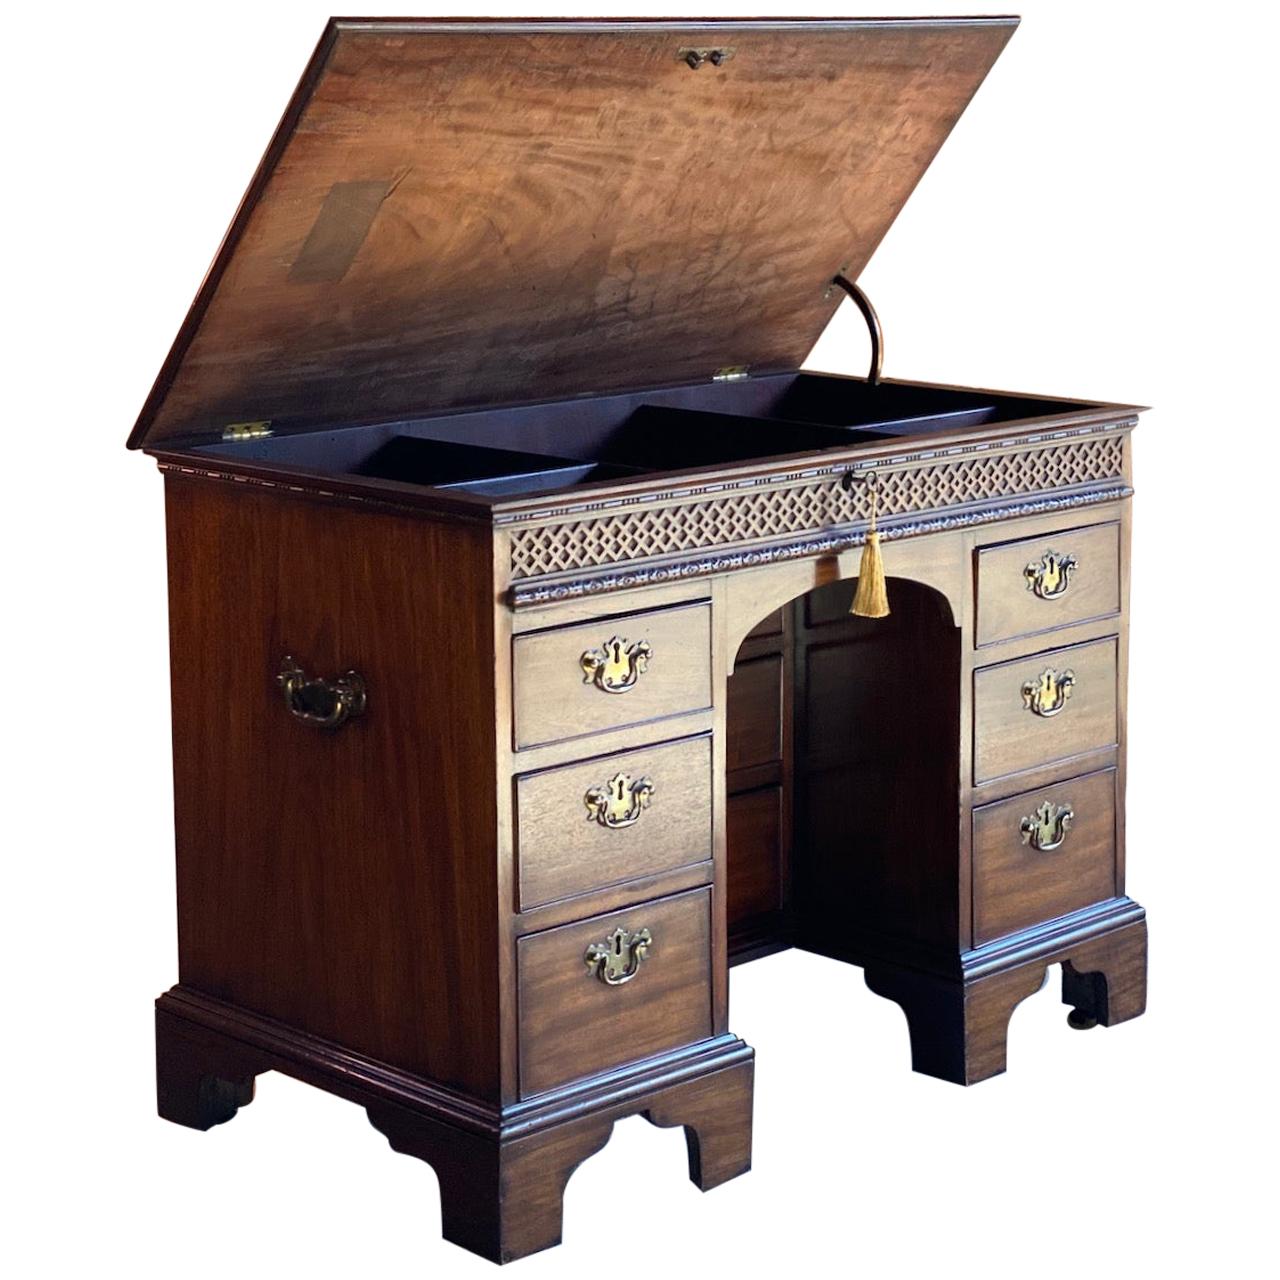 Rare Georgian mahogany kneehole desk lift up top, 18th century, circa 1780

A rare 18th century George III mahogany gentleman's kneehole desk, England, circa 1780, the lockable hinged lift up top enclosing an arrangement of compartments, above a